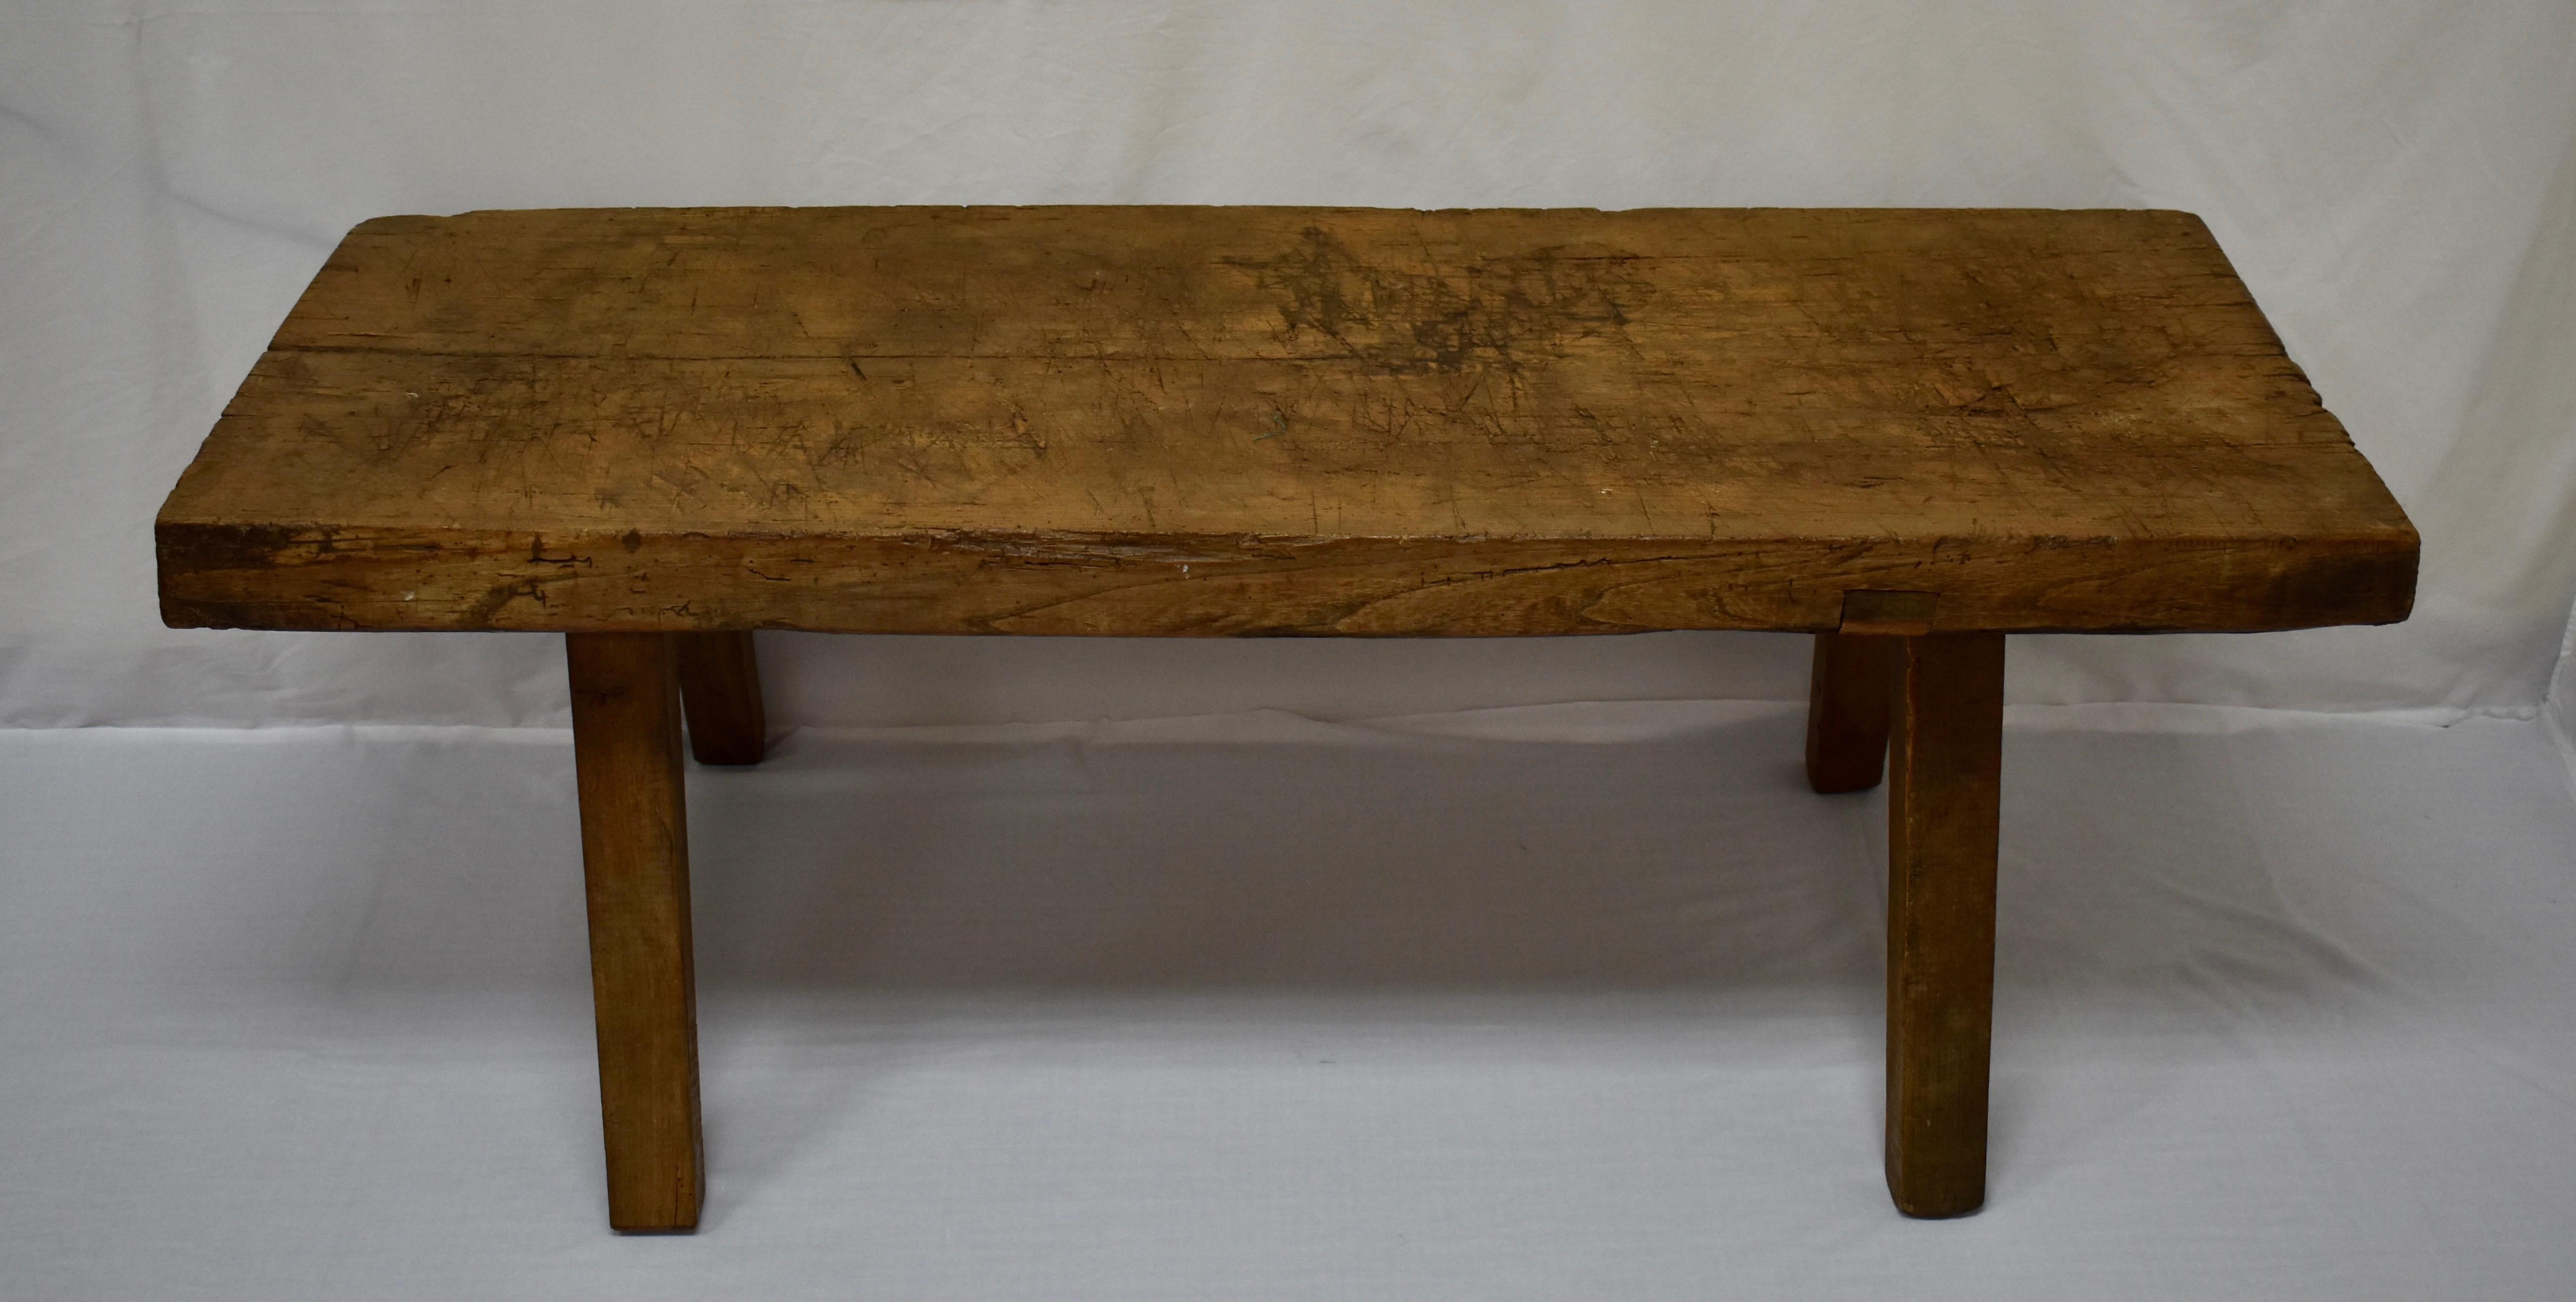 This outstanding oak pig bench low table sits on four 2”x2.5” sturdy splayed legs which are mortised into the underside of the top. The top itself is a single slab of oak 3” thick, which has developed a beautiful patina over the decades. It is